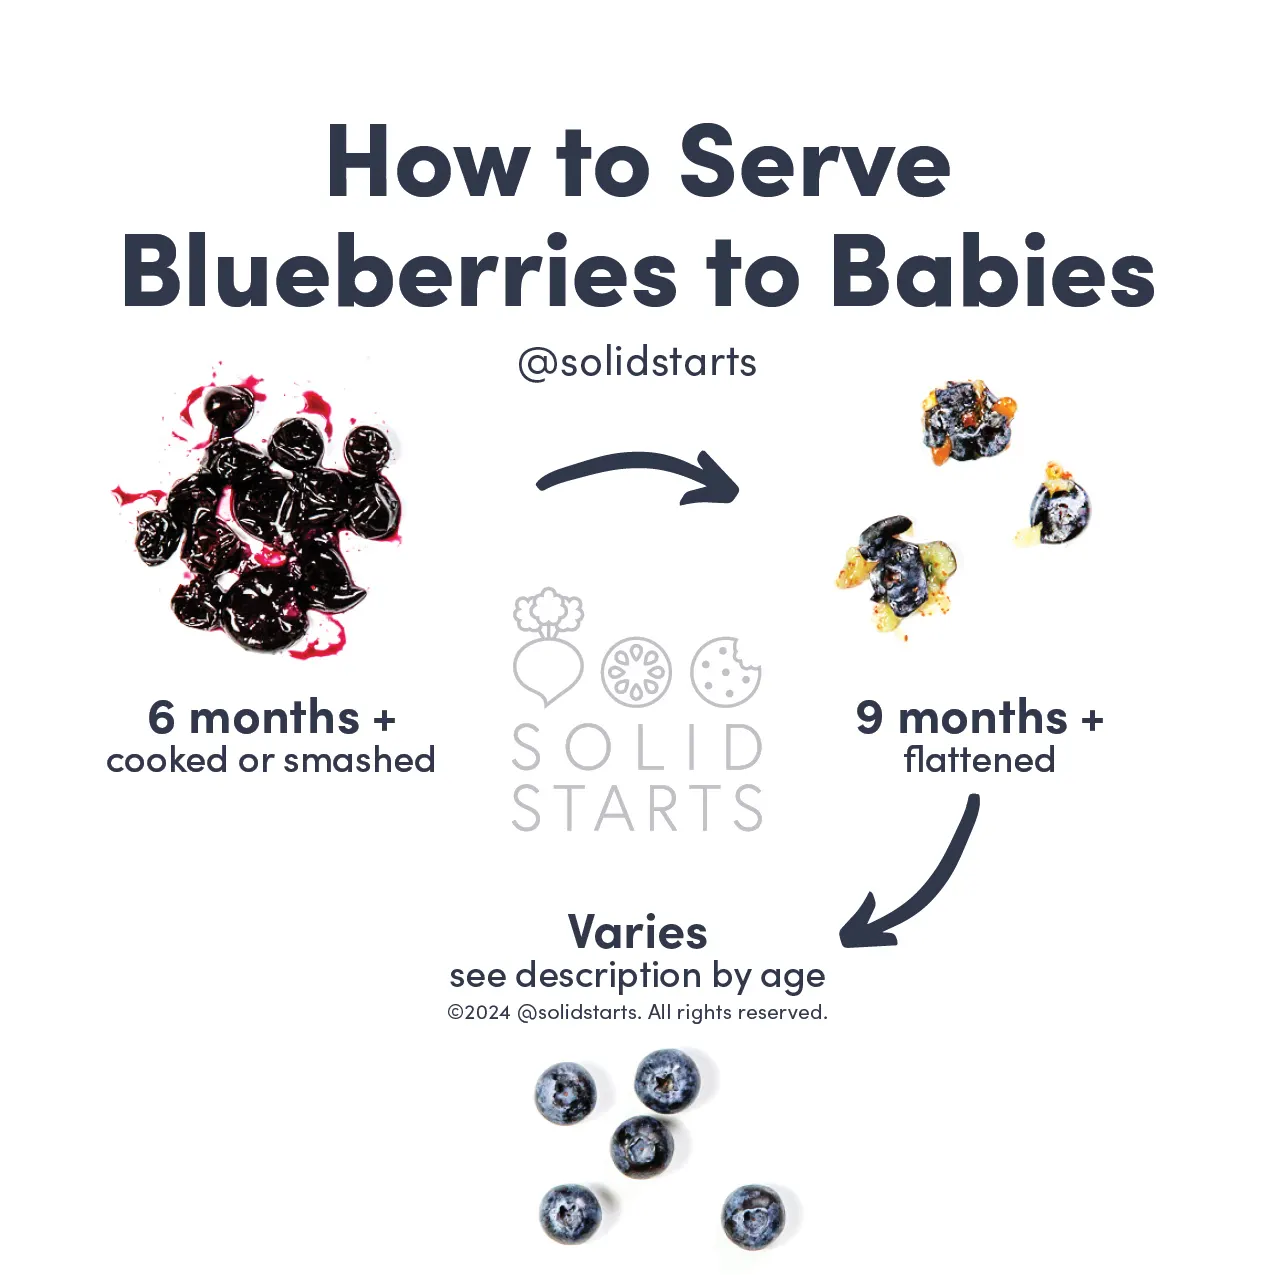 a Solid Starts infographic with the header "How to Serve Blueberries to Babies": cooked/smashed for 6 mos+, flattened for 9 mos+, and varies for whole berries